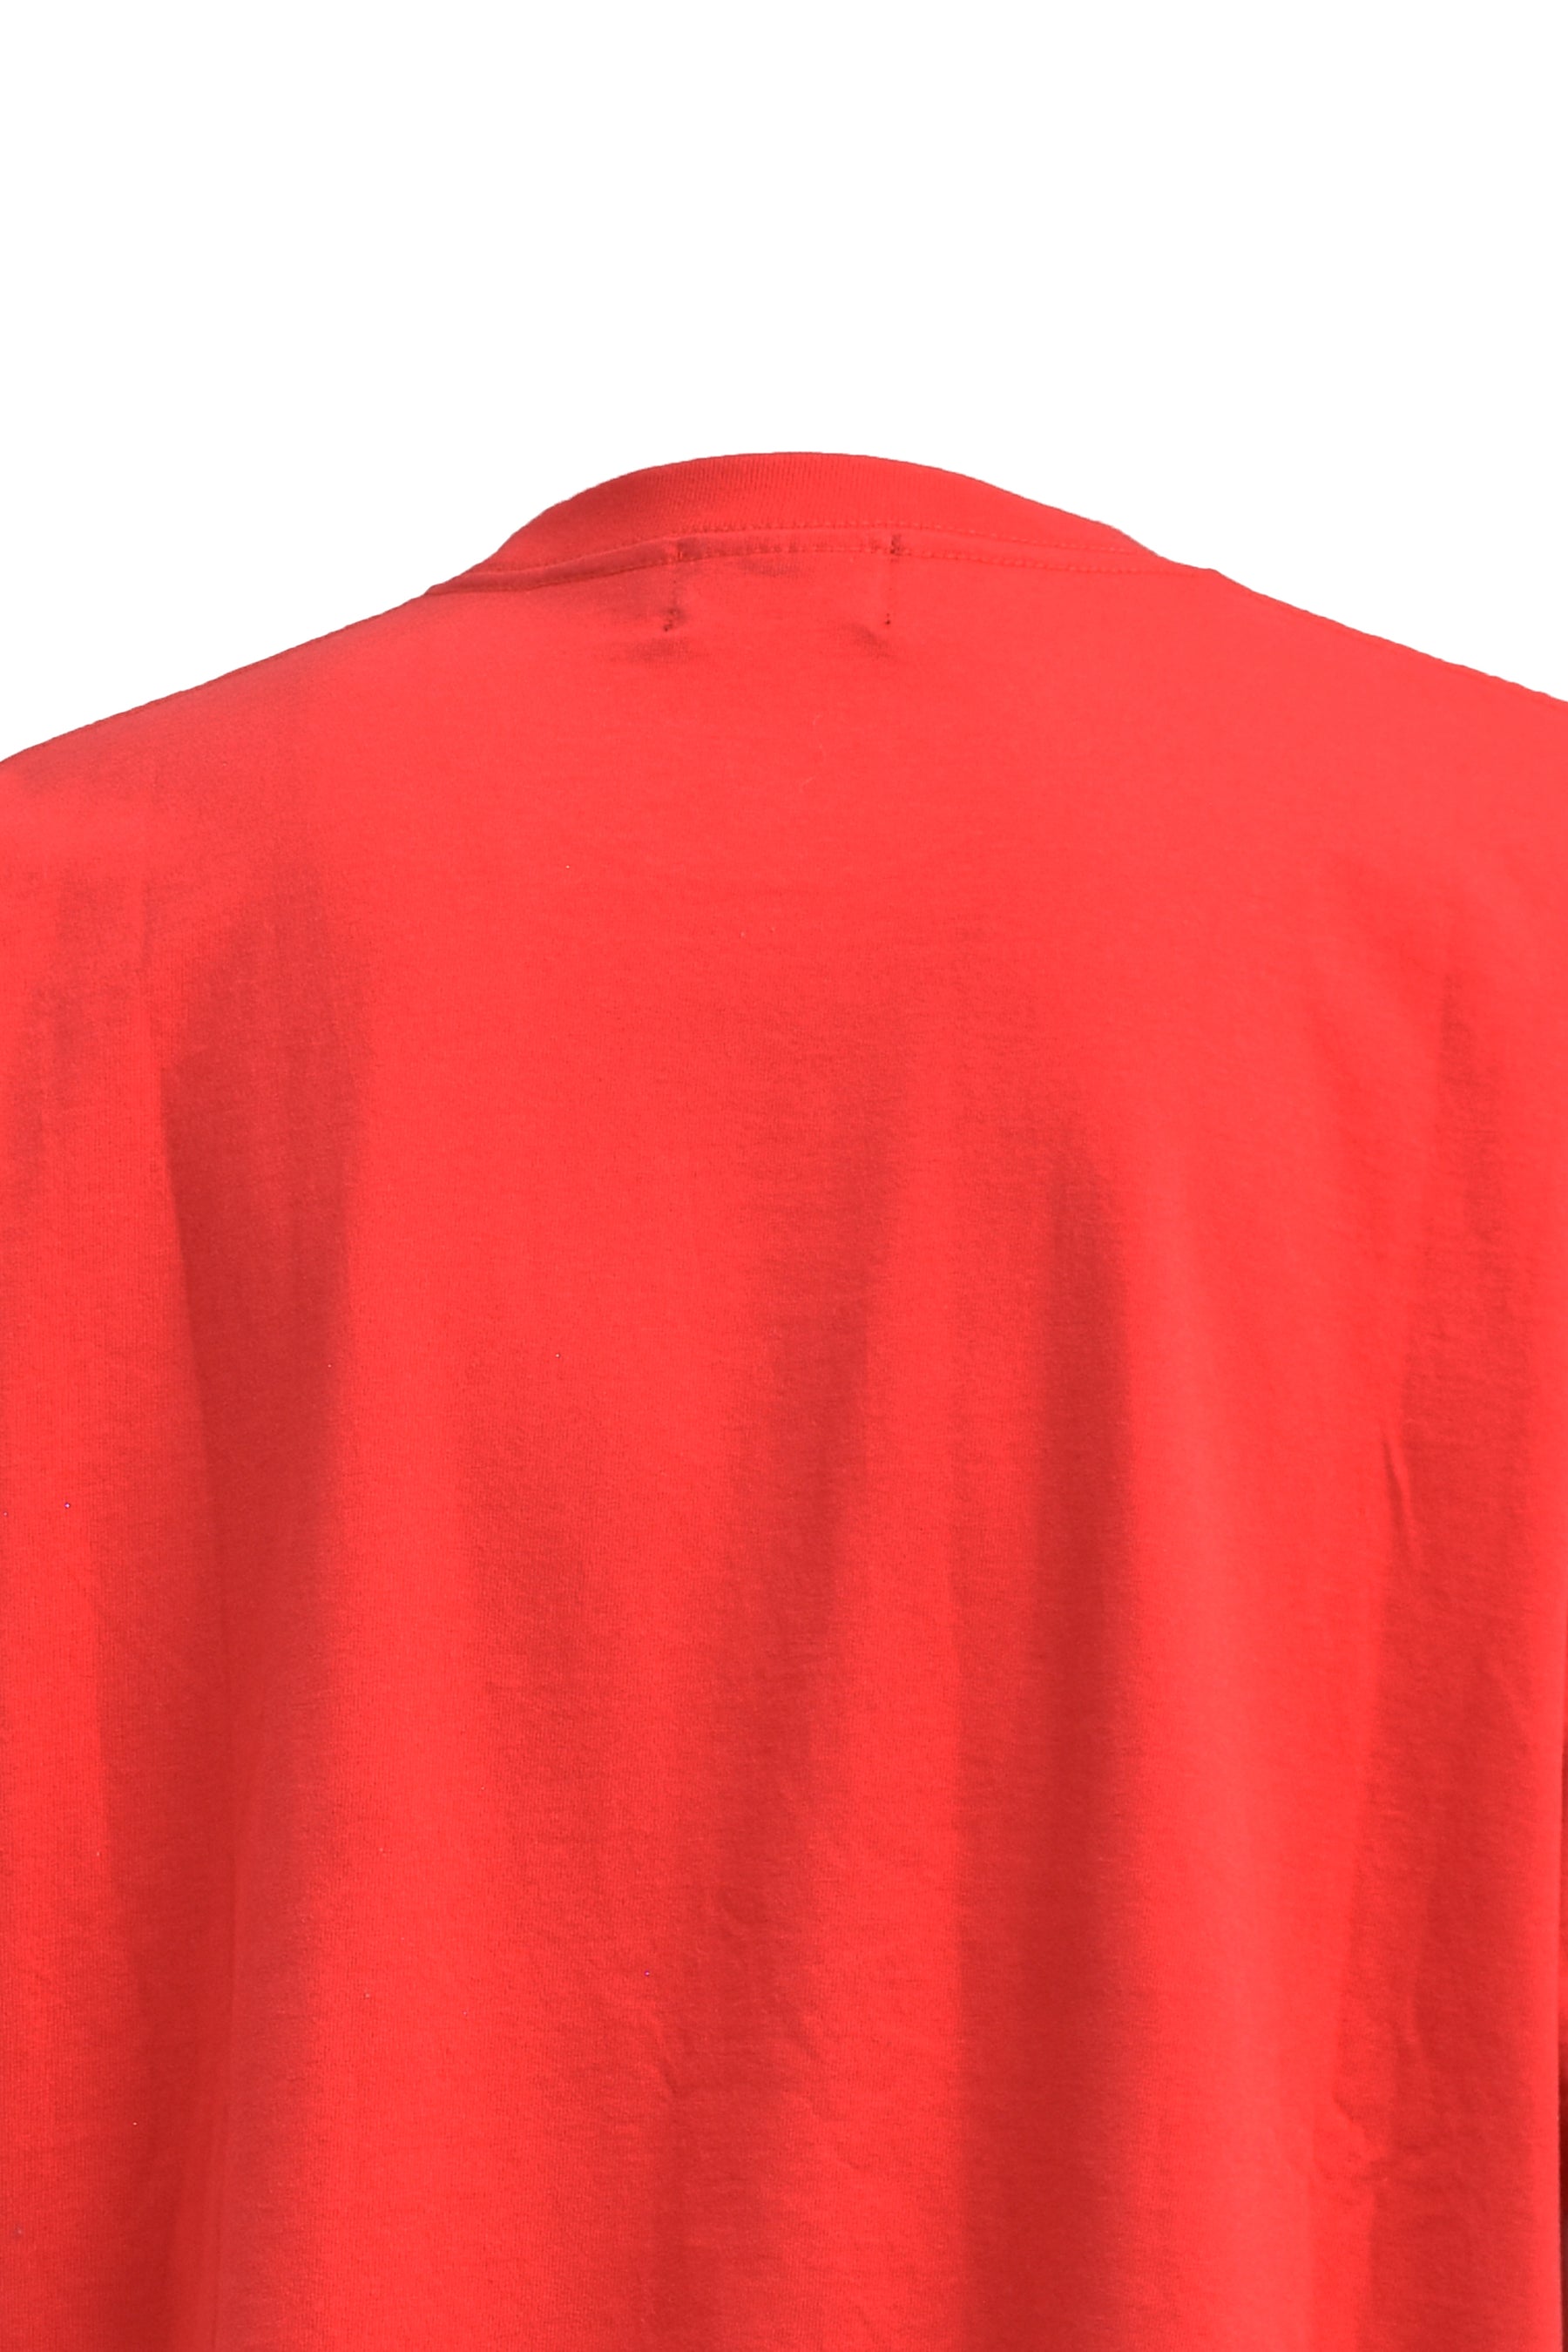 OLD ENGLISH 3D LOGO TEE / RED